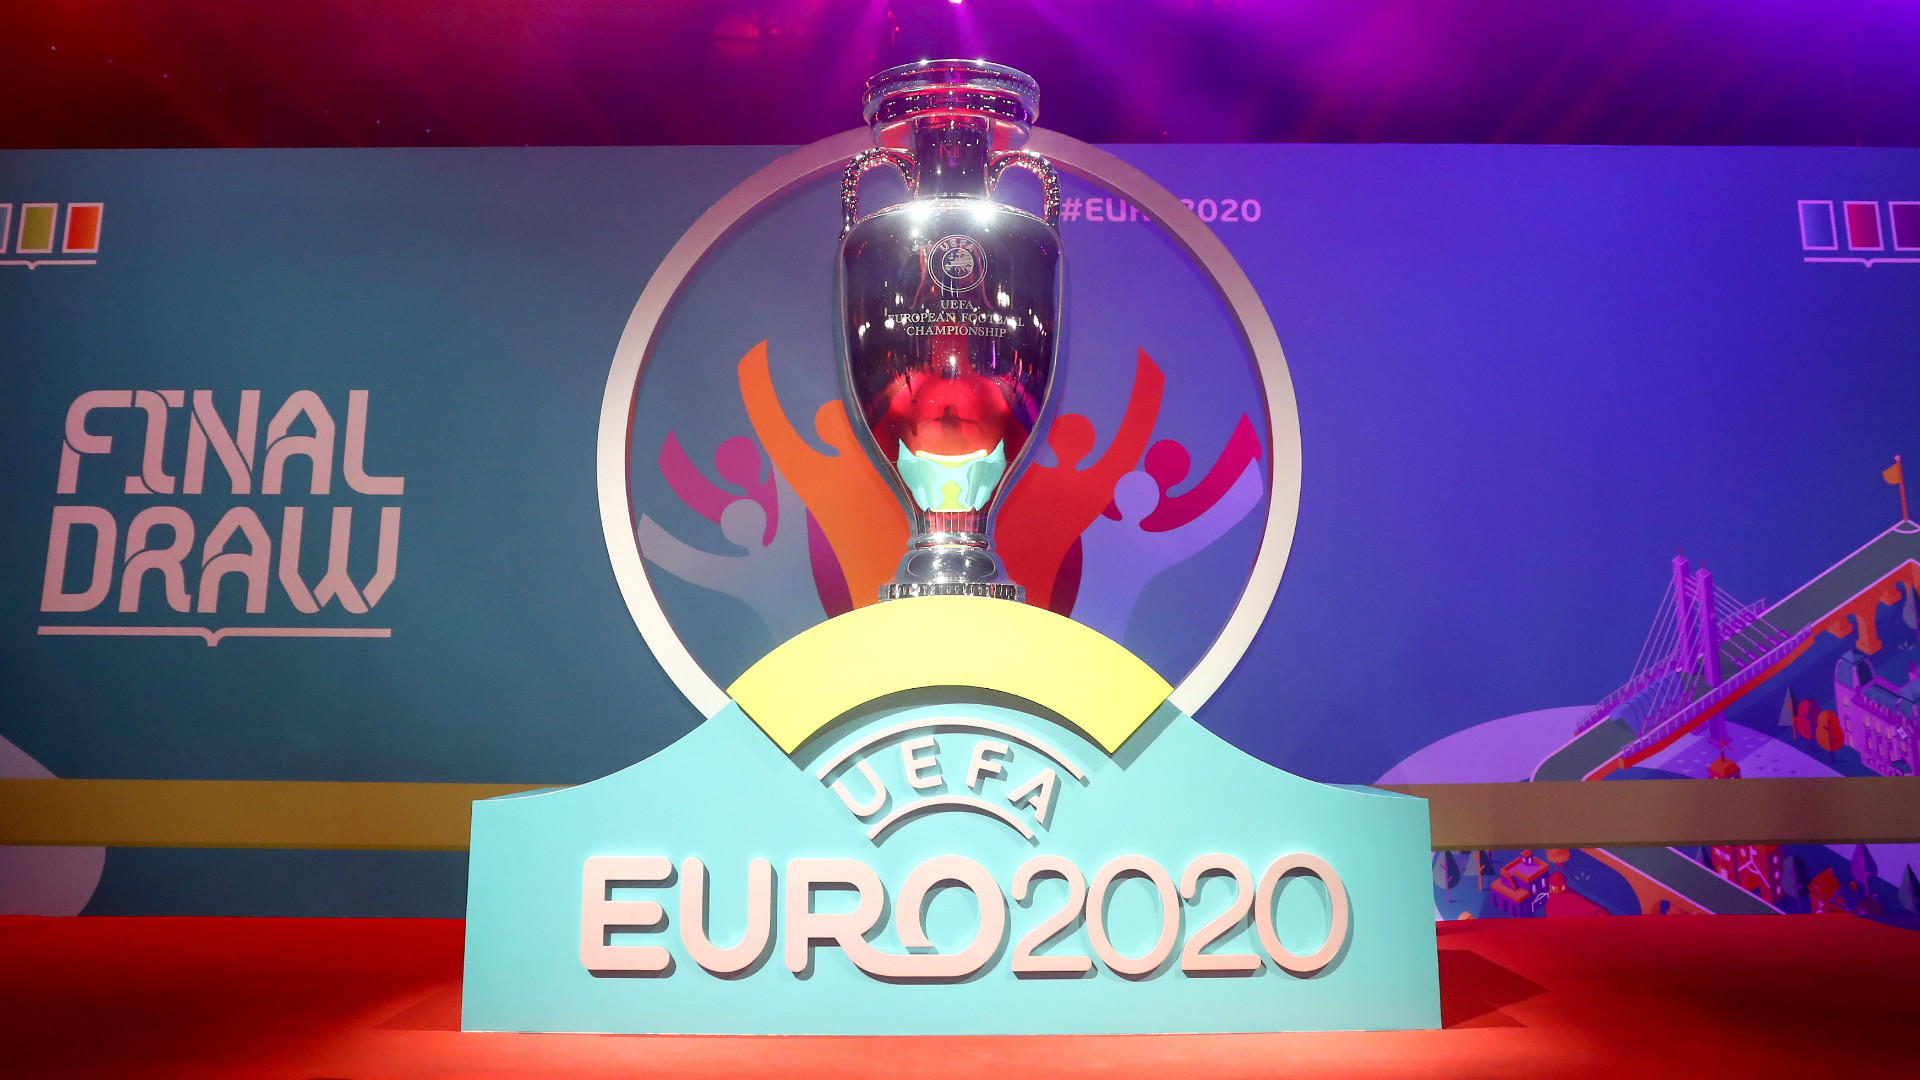 How to watch Euro 2020 quarterfinals from India?